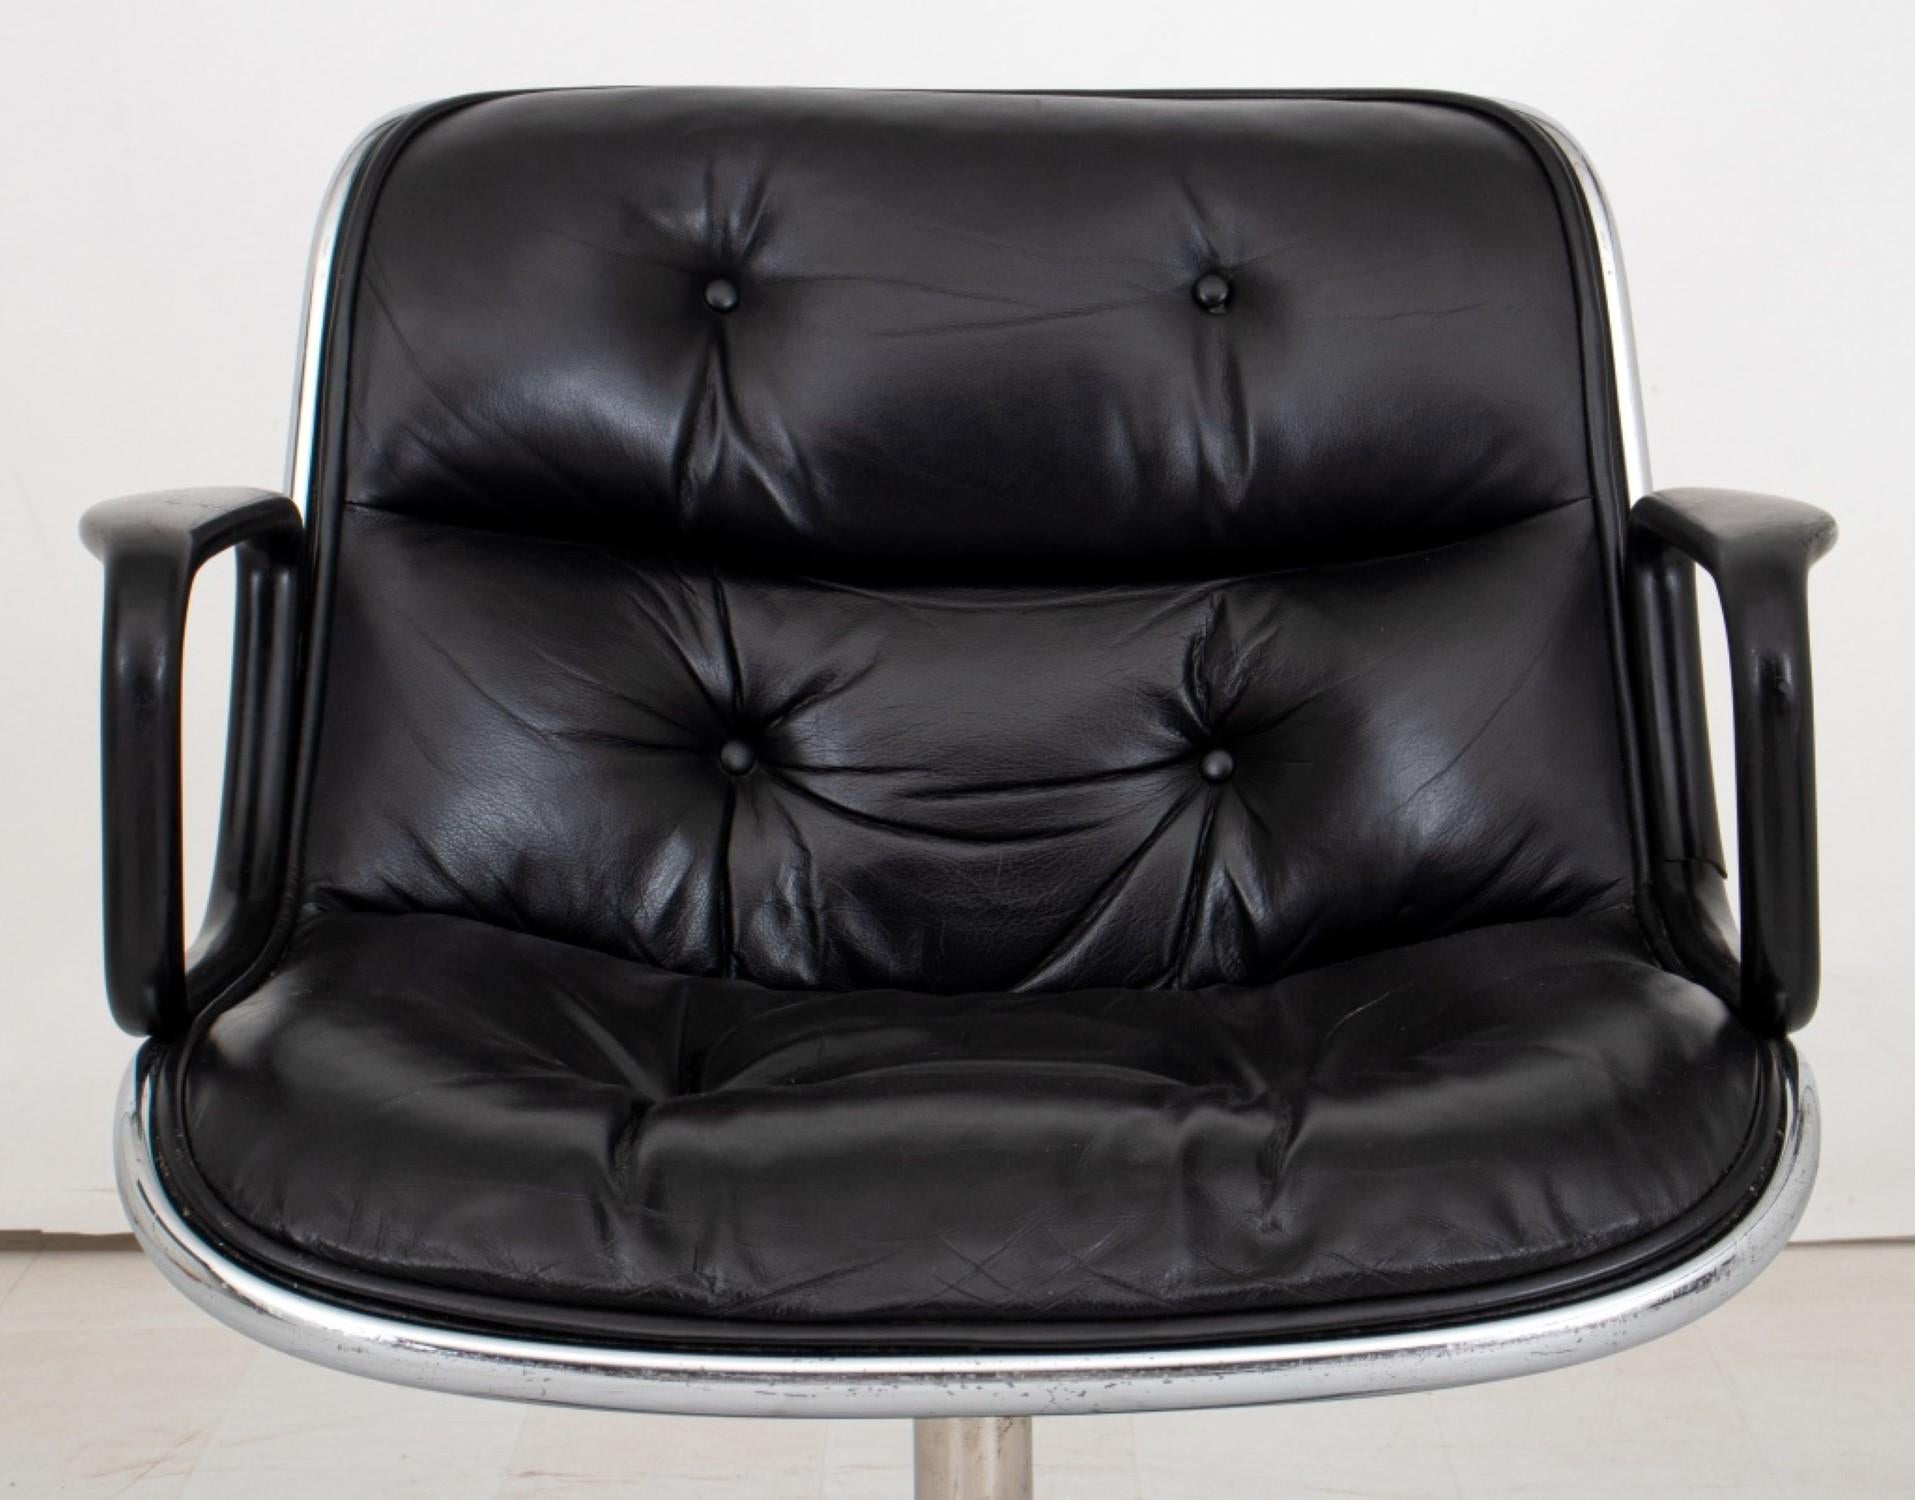 Pollock Executive Office Chair for Knoll International:
Charles Pollock Executive Office Chair for Knoll International (1963)
Design: Button tufted black leather seat and backing on a chrome base with four casters.
Dimensions: 32.25